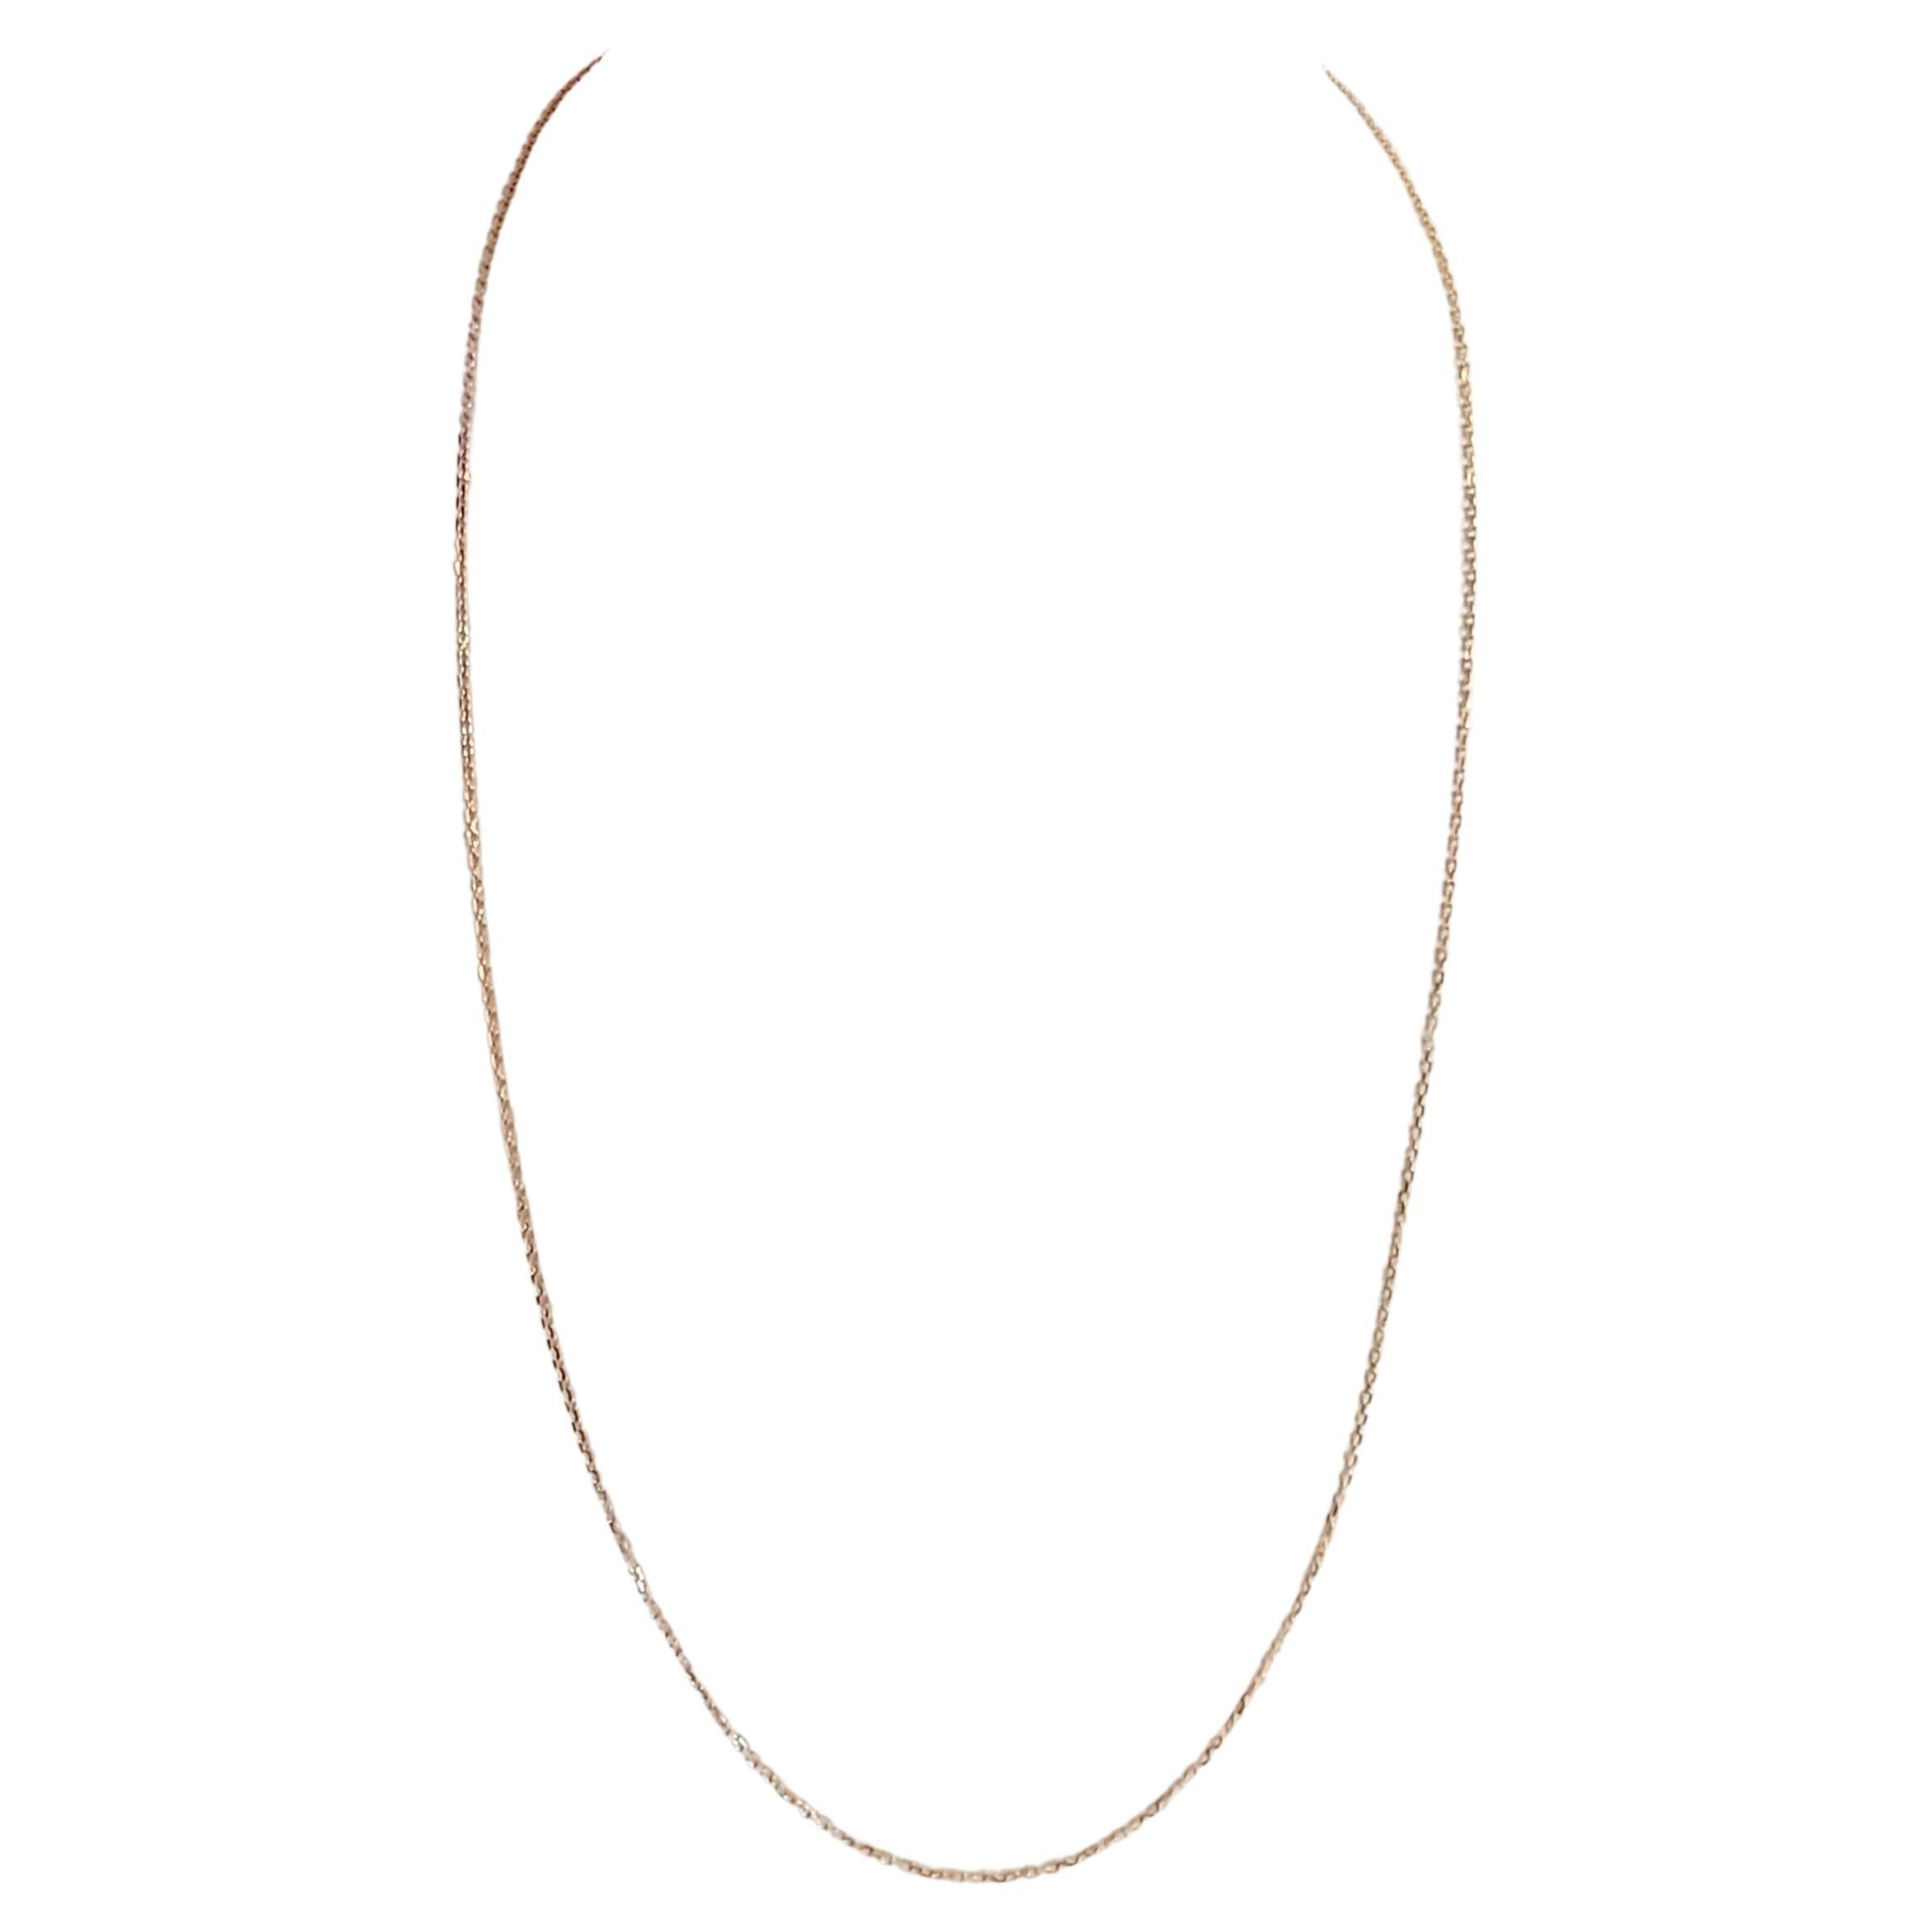 Tiffany & Co. 18K Rose Gold Chain 18"